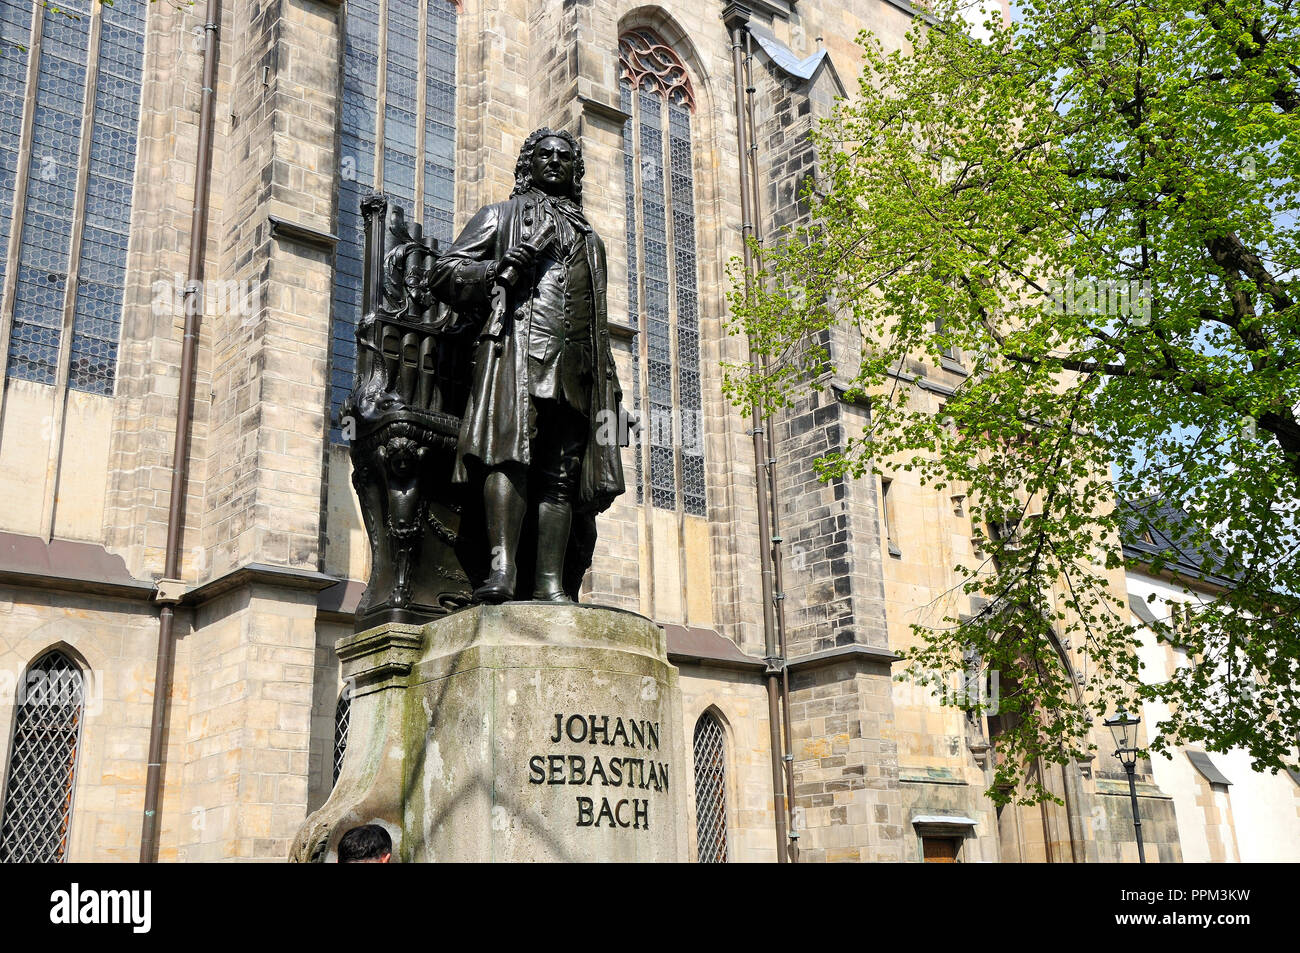 Johann Sebastian Bach statue near Thomaskirche where, in 1723, he was appointed Cantor and Director of Music. Leipzig, Germany Stock Photo